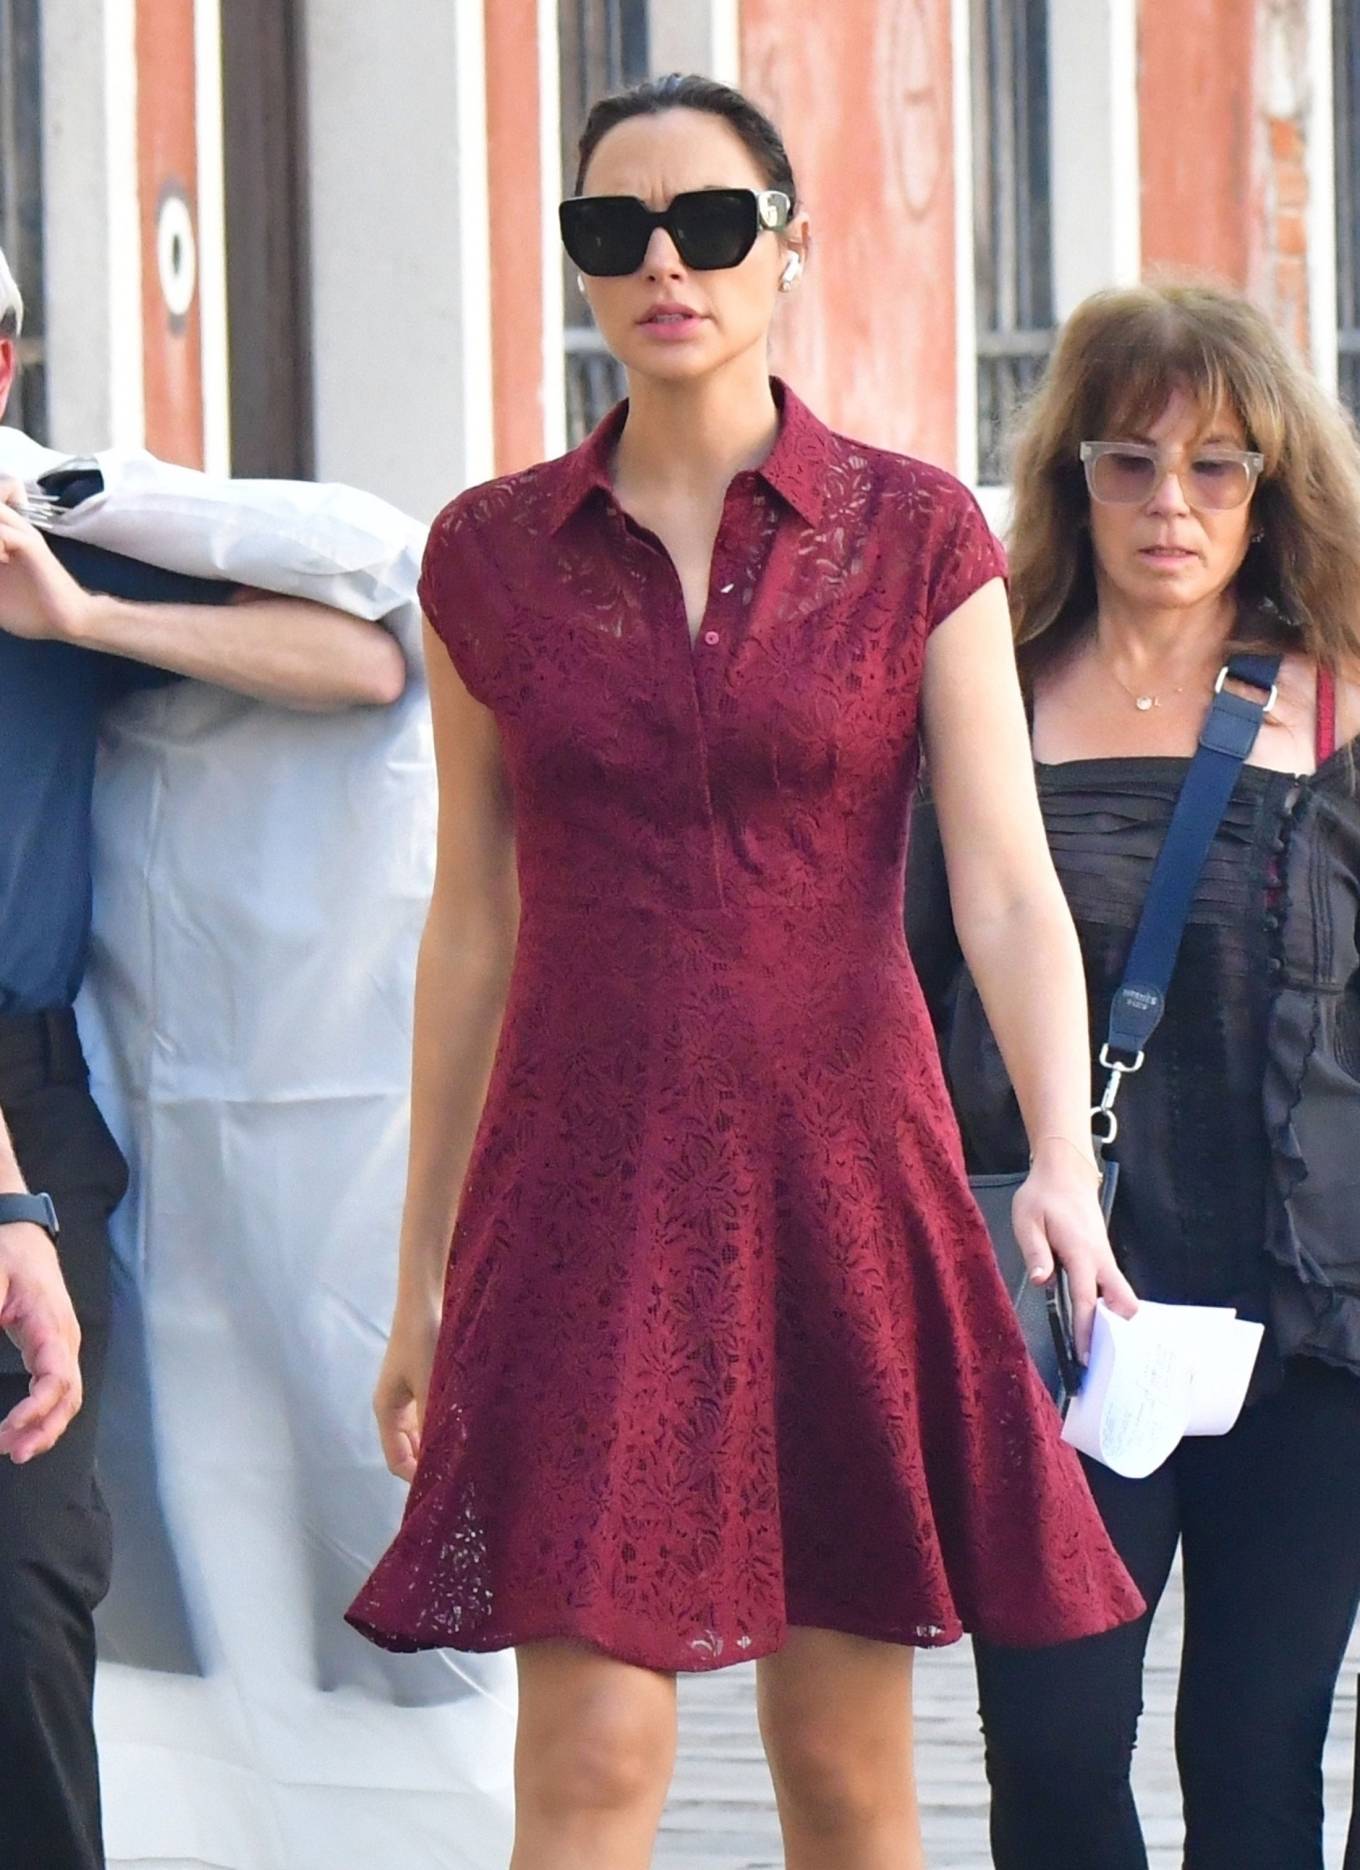 Gal Gadot - In her maroon dress and Gucci sunglasses as she heads set out in Venice